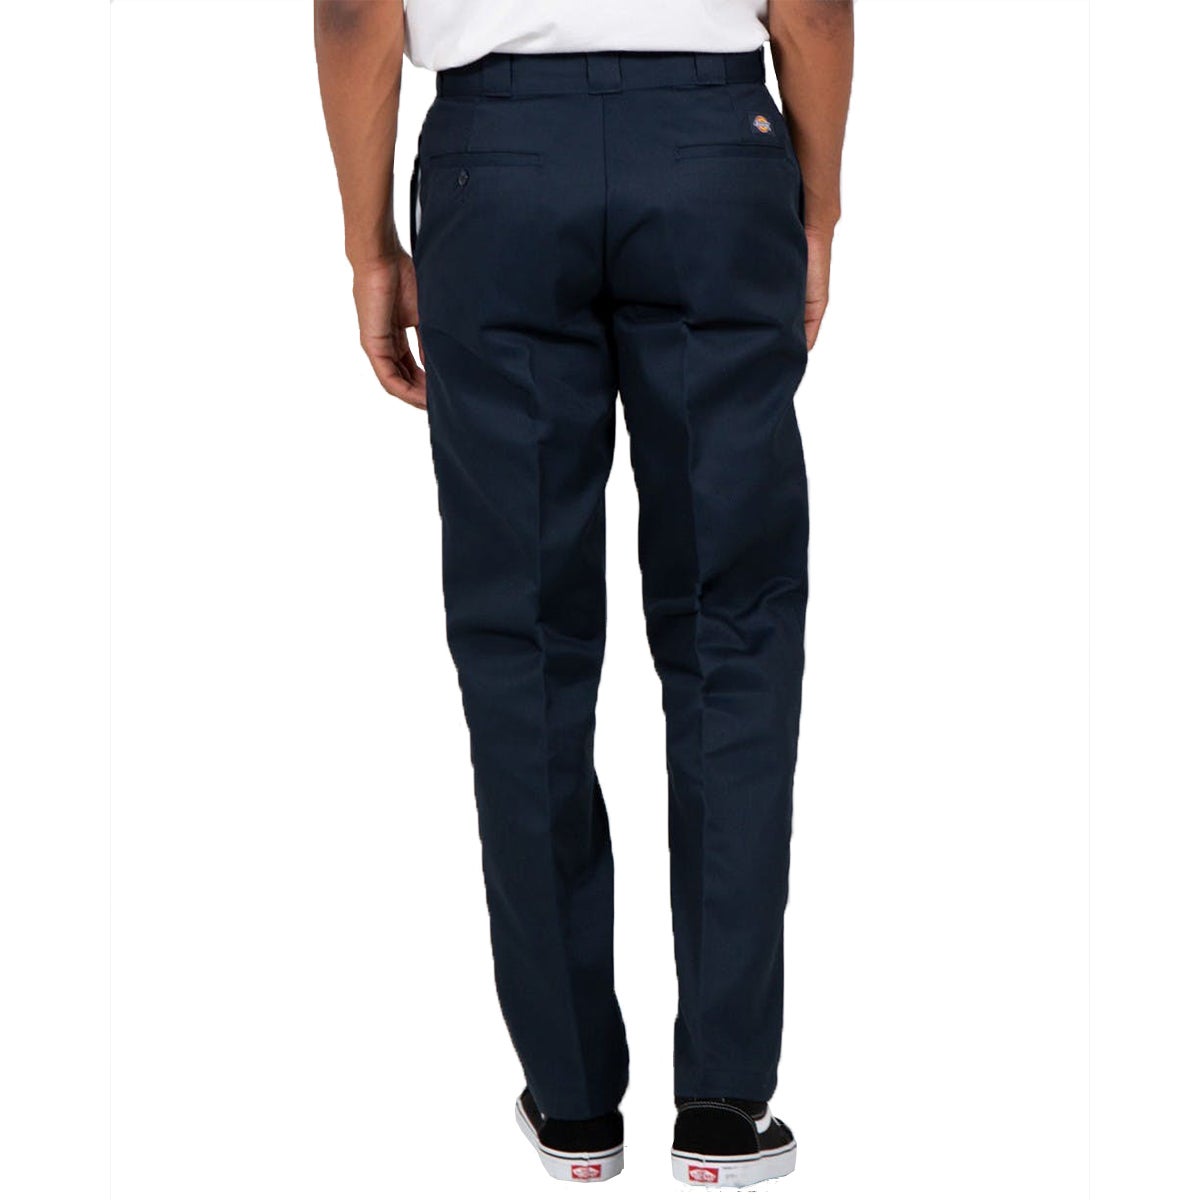 Buy Dickies Black Everyday Trousers from the Next UK online shop